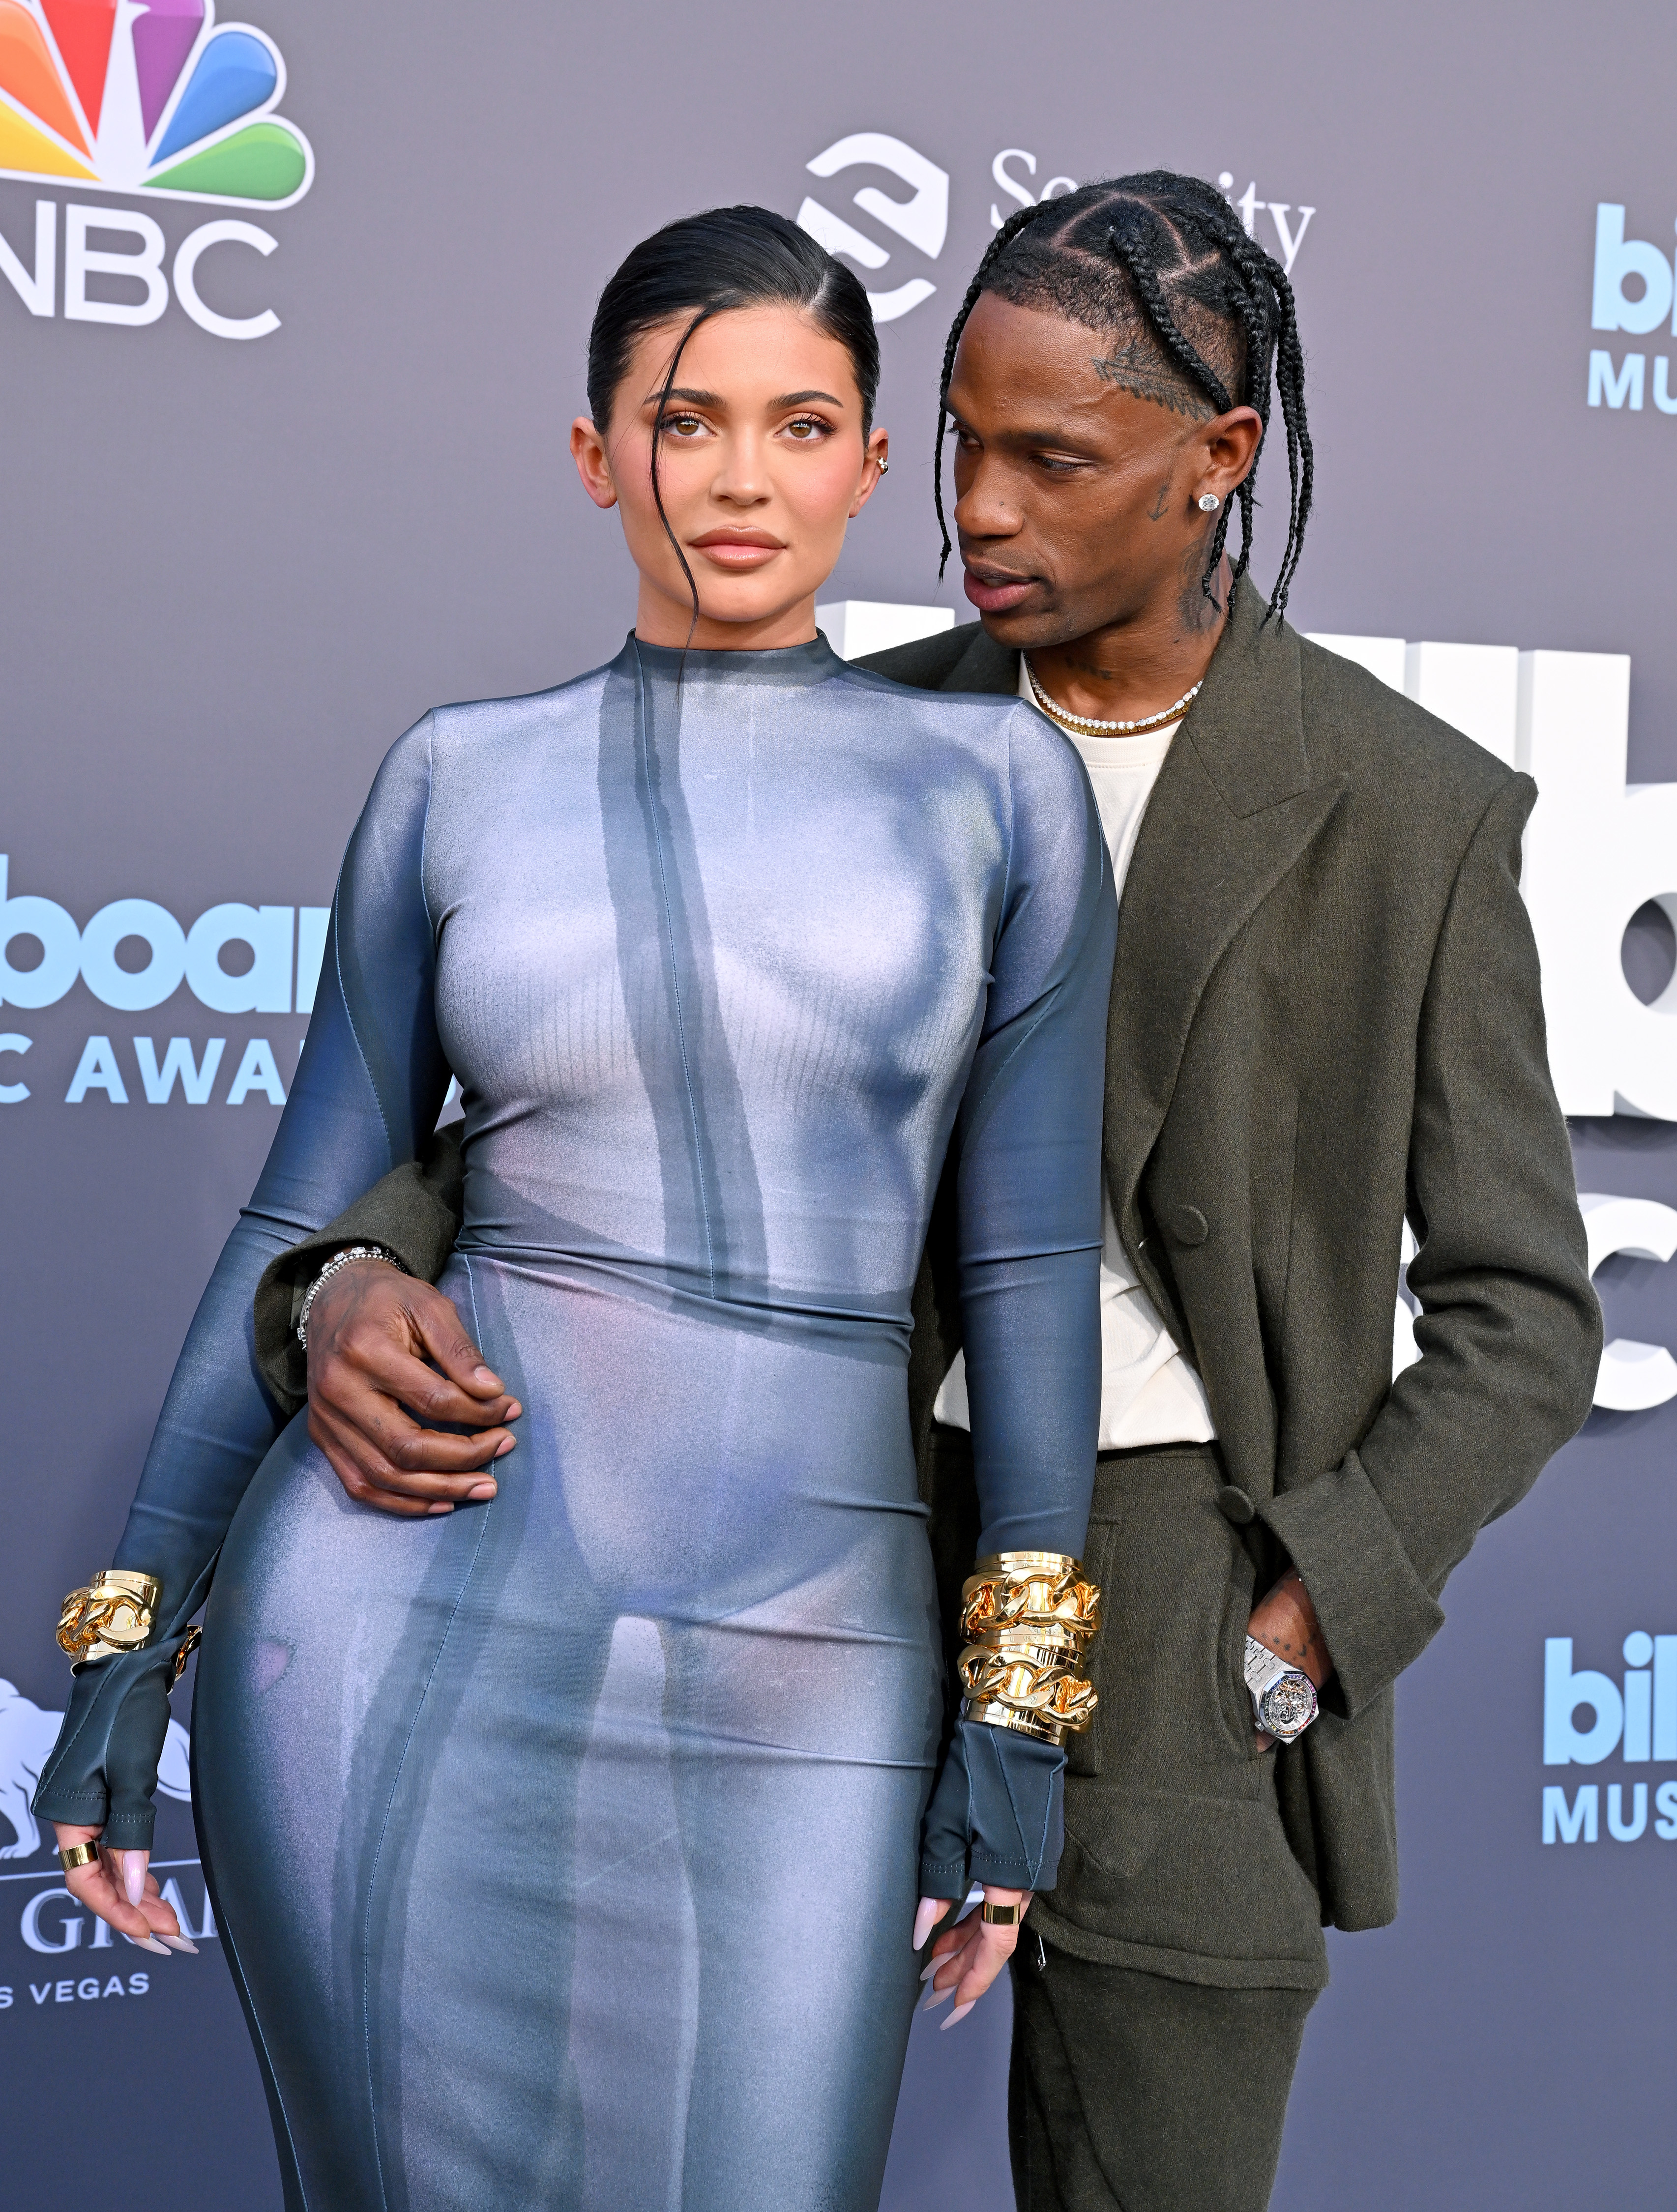 kylie and travis posing for cameras at the billboard music awards